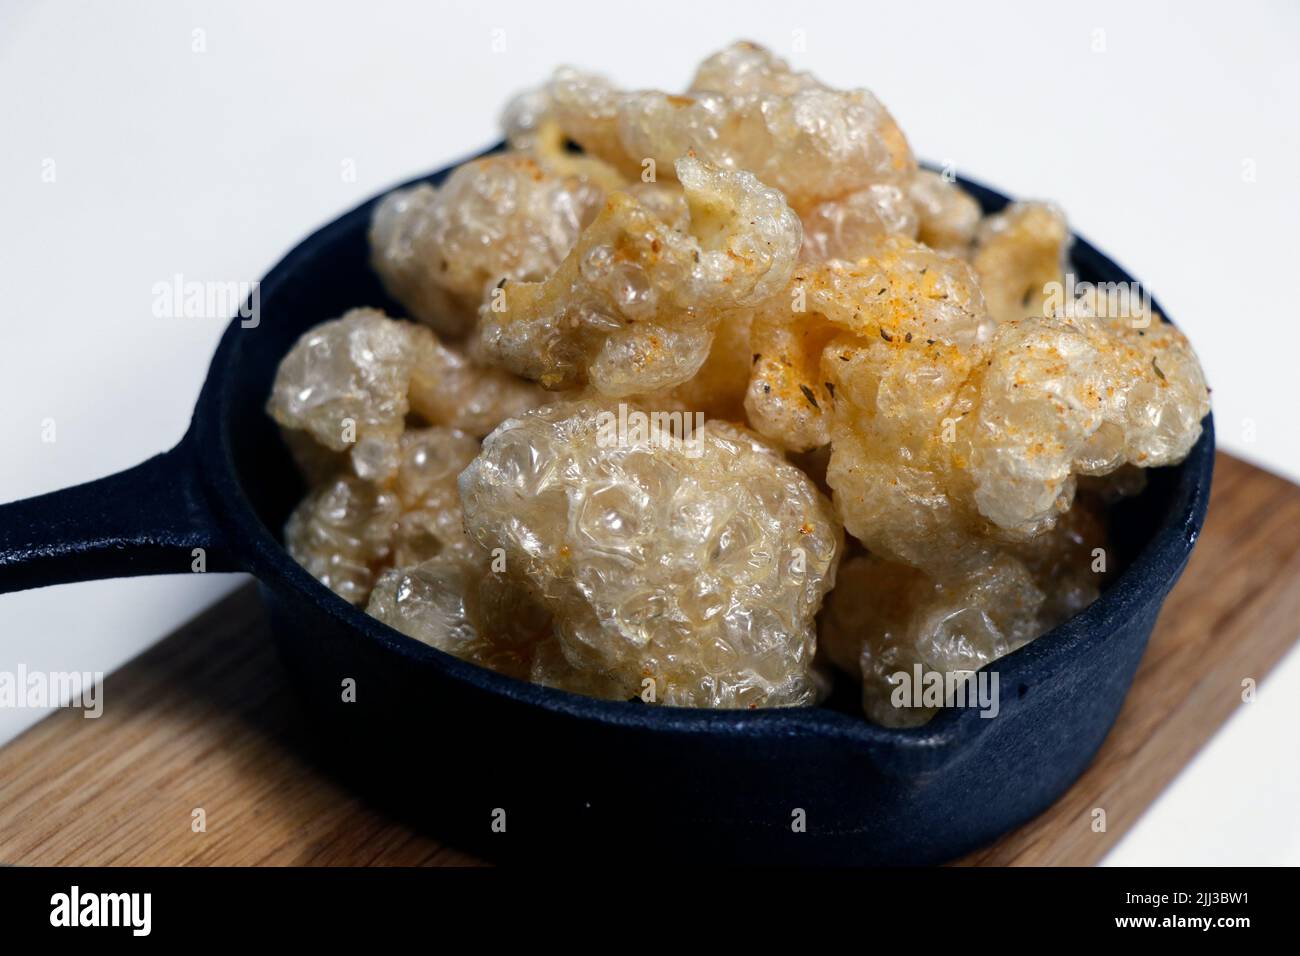 sun dried and deep fat fryer crispy pork skin known as chicharon in a serving dish, asian delicacy food Stock Photo